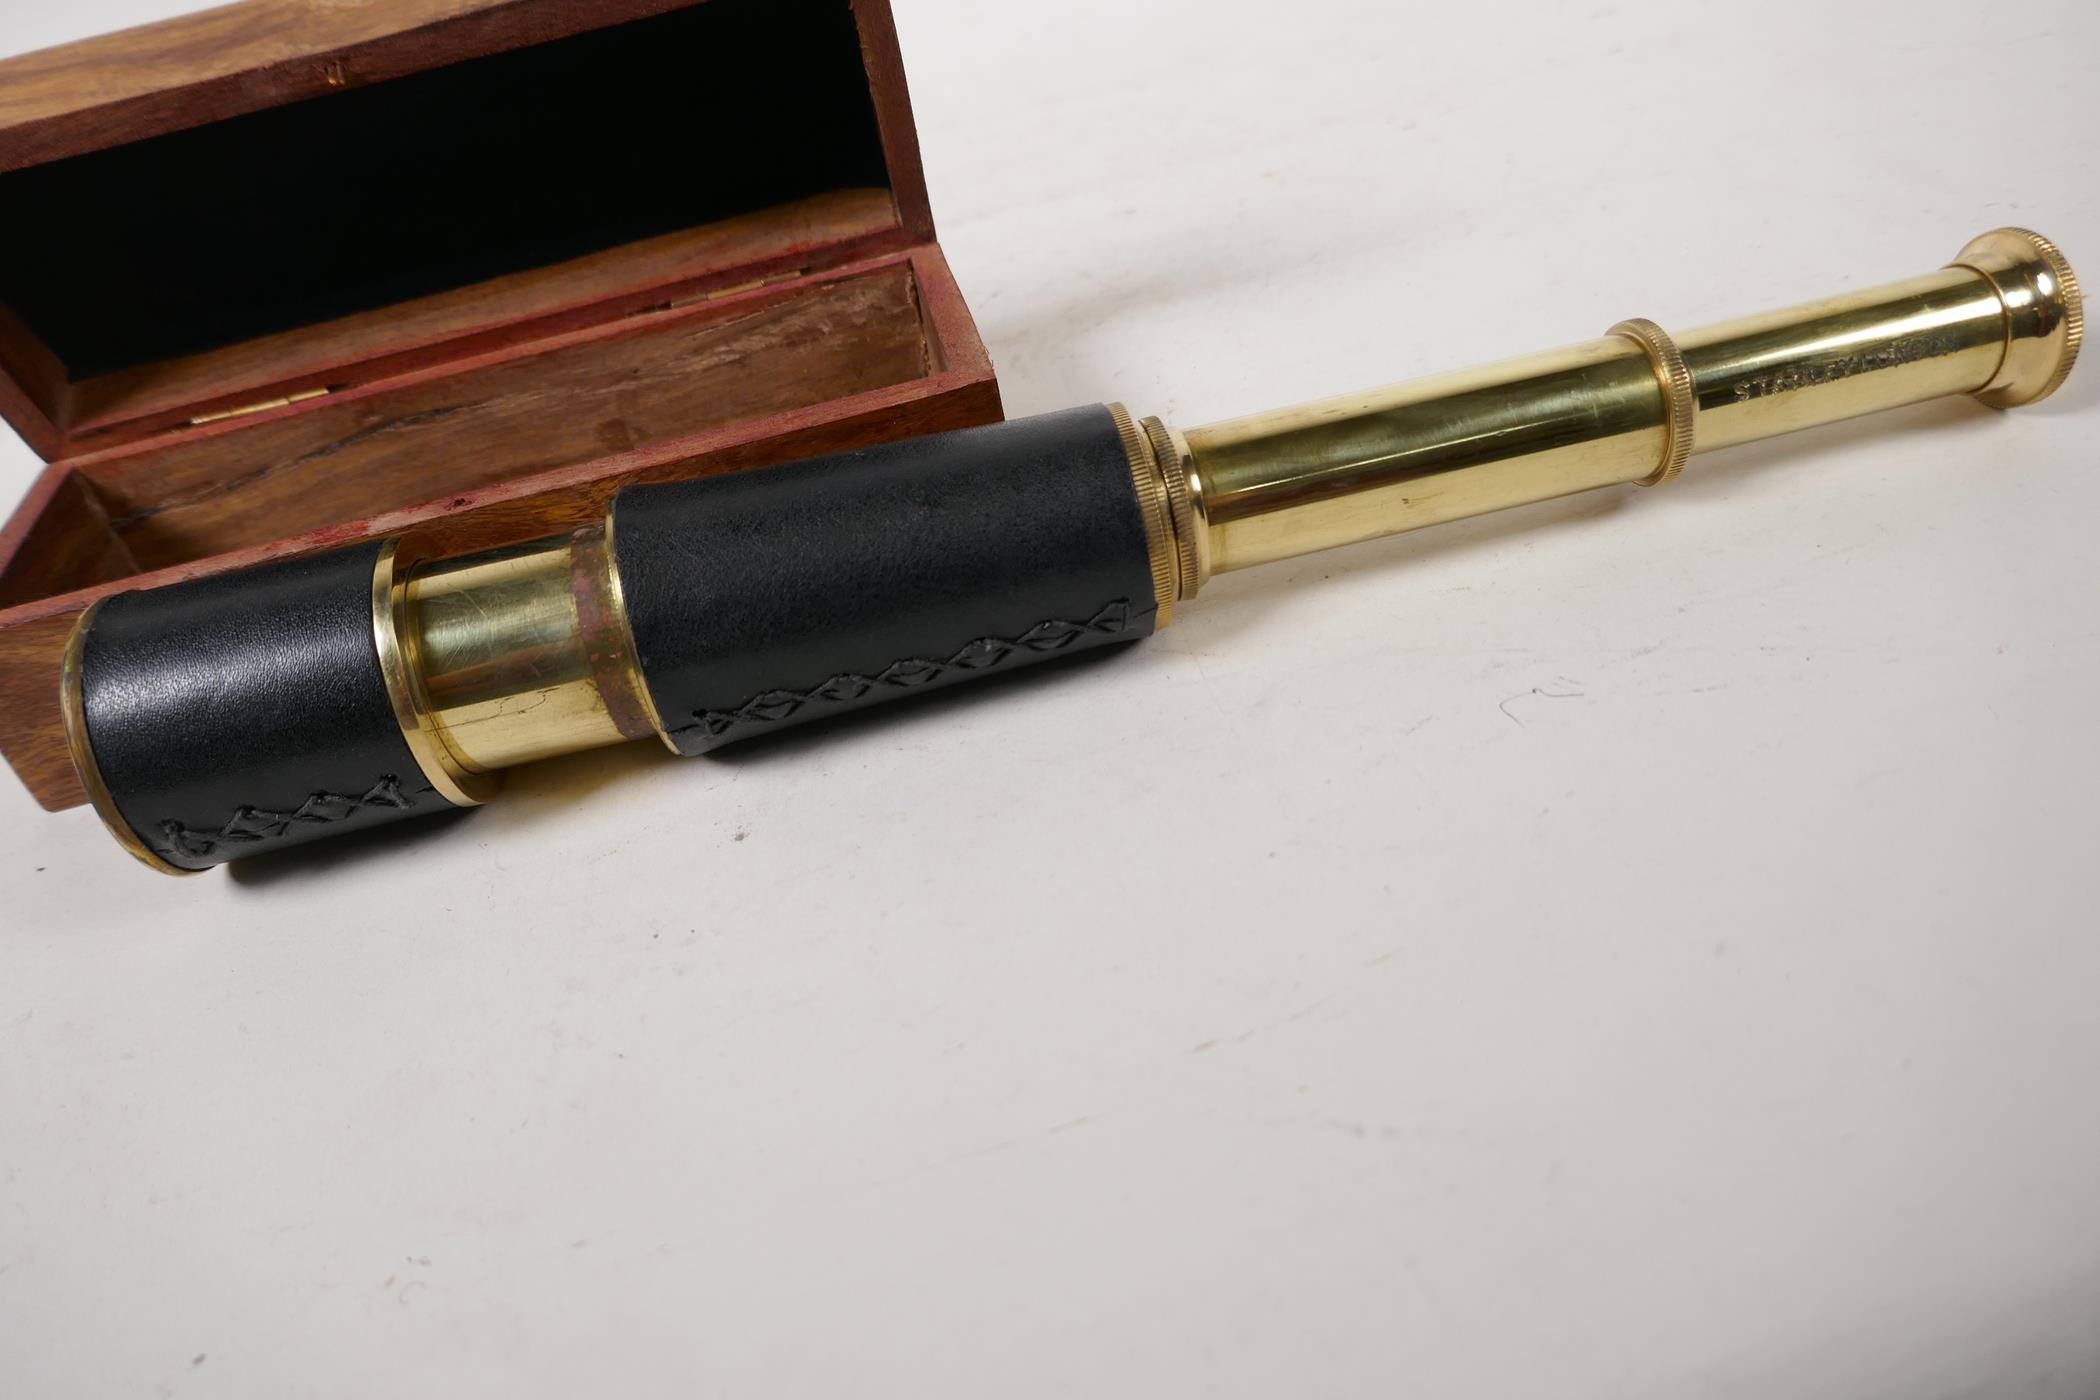 A two draw brass telescope, 13" long extended, in a hardwood box - Image 2 of 4